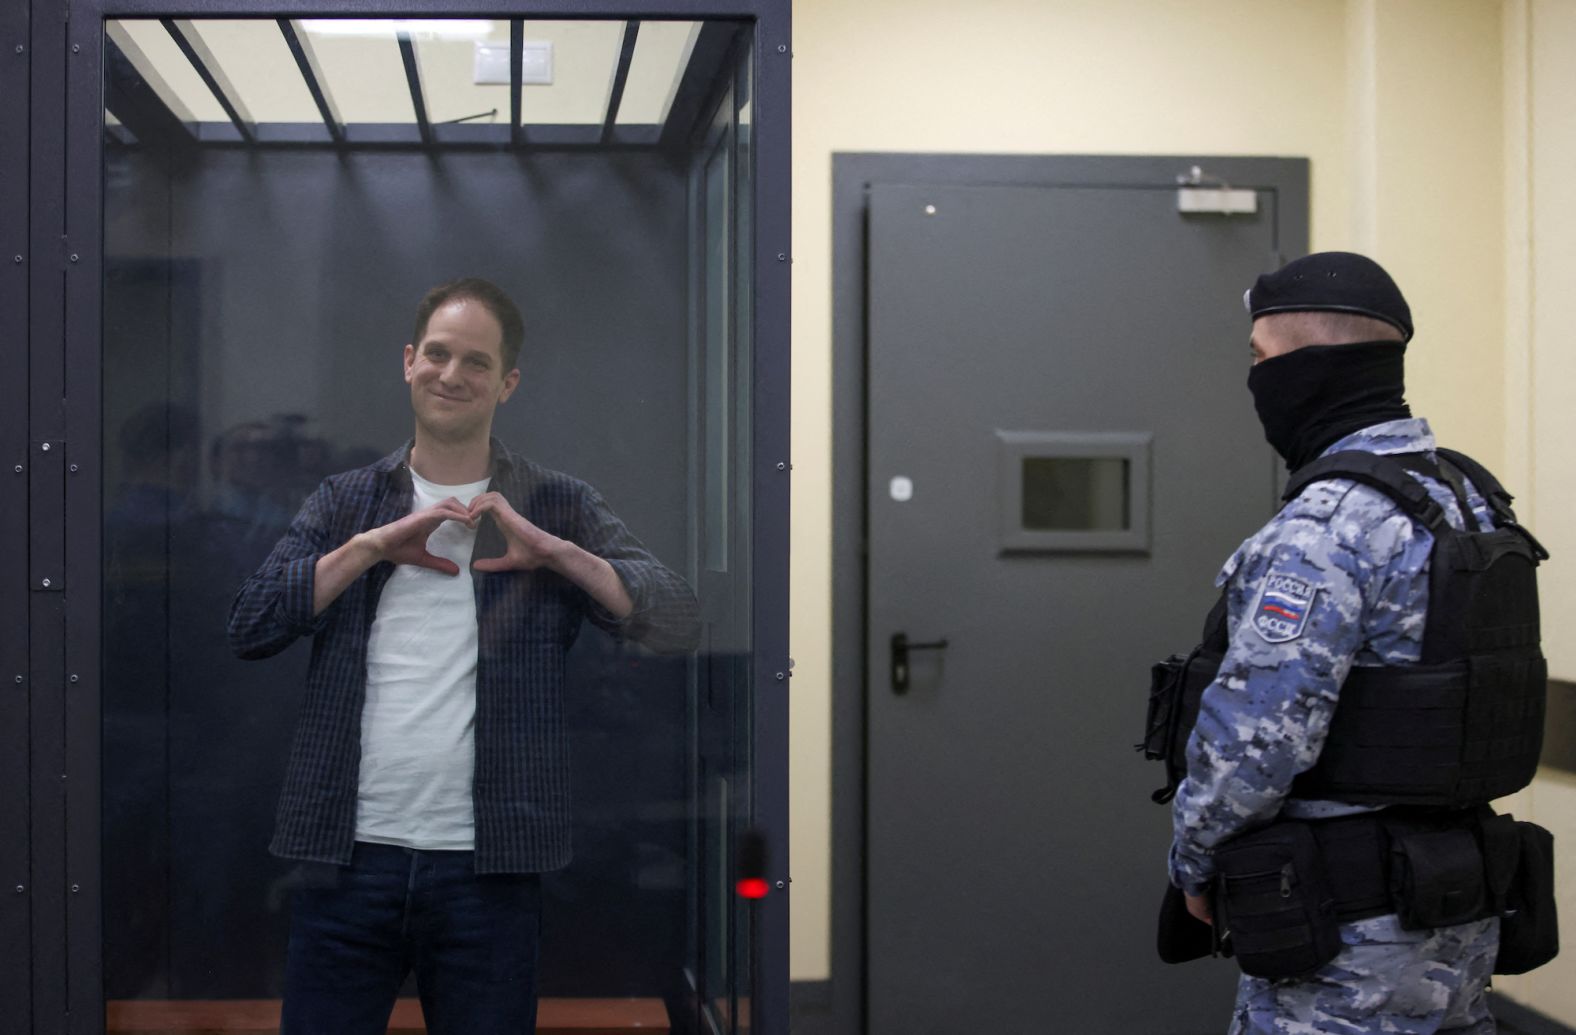 Wall Street Journal reporter Evan Gershkovich makes a heart-shaped gesture inside a defendants cage before a court hearing in Moscow on Tuesday, April 23. <a href="https://www.cnn.com/2024/03/29/politics/evan-gershkovich-one-year-russian-detention/index.html" target="_blank">Gershkovich has spent over a year in Russian detention</a>. He is being held on espionage charges, which he and his employer vehemently contest.